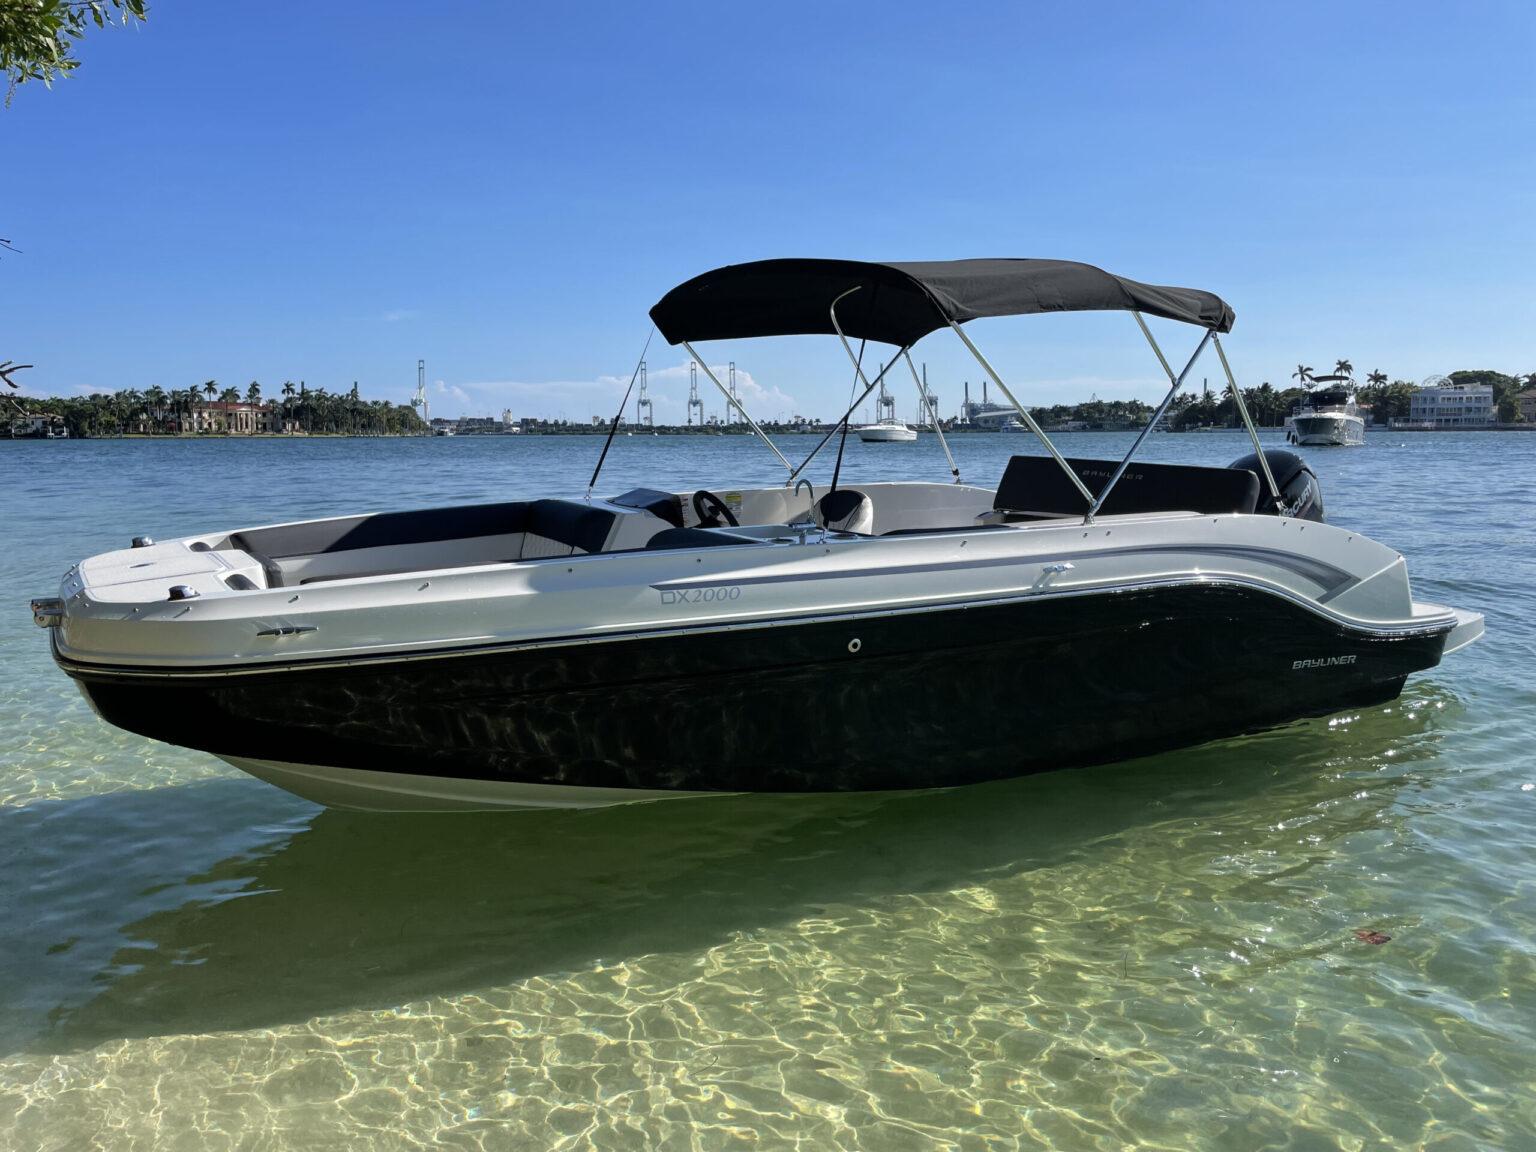 Boat Rentals and Yacht Rentals - Dolphin Water Sport